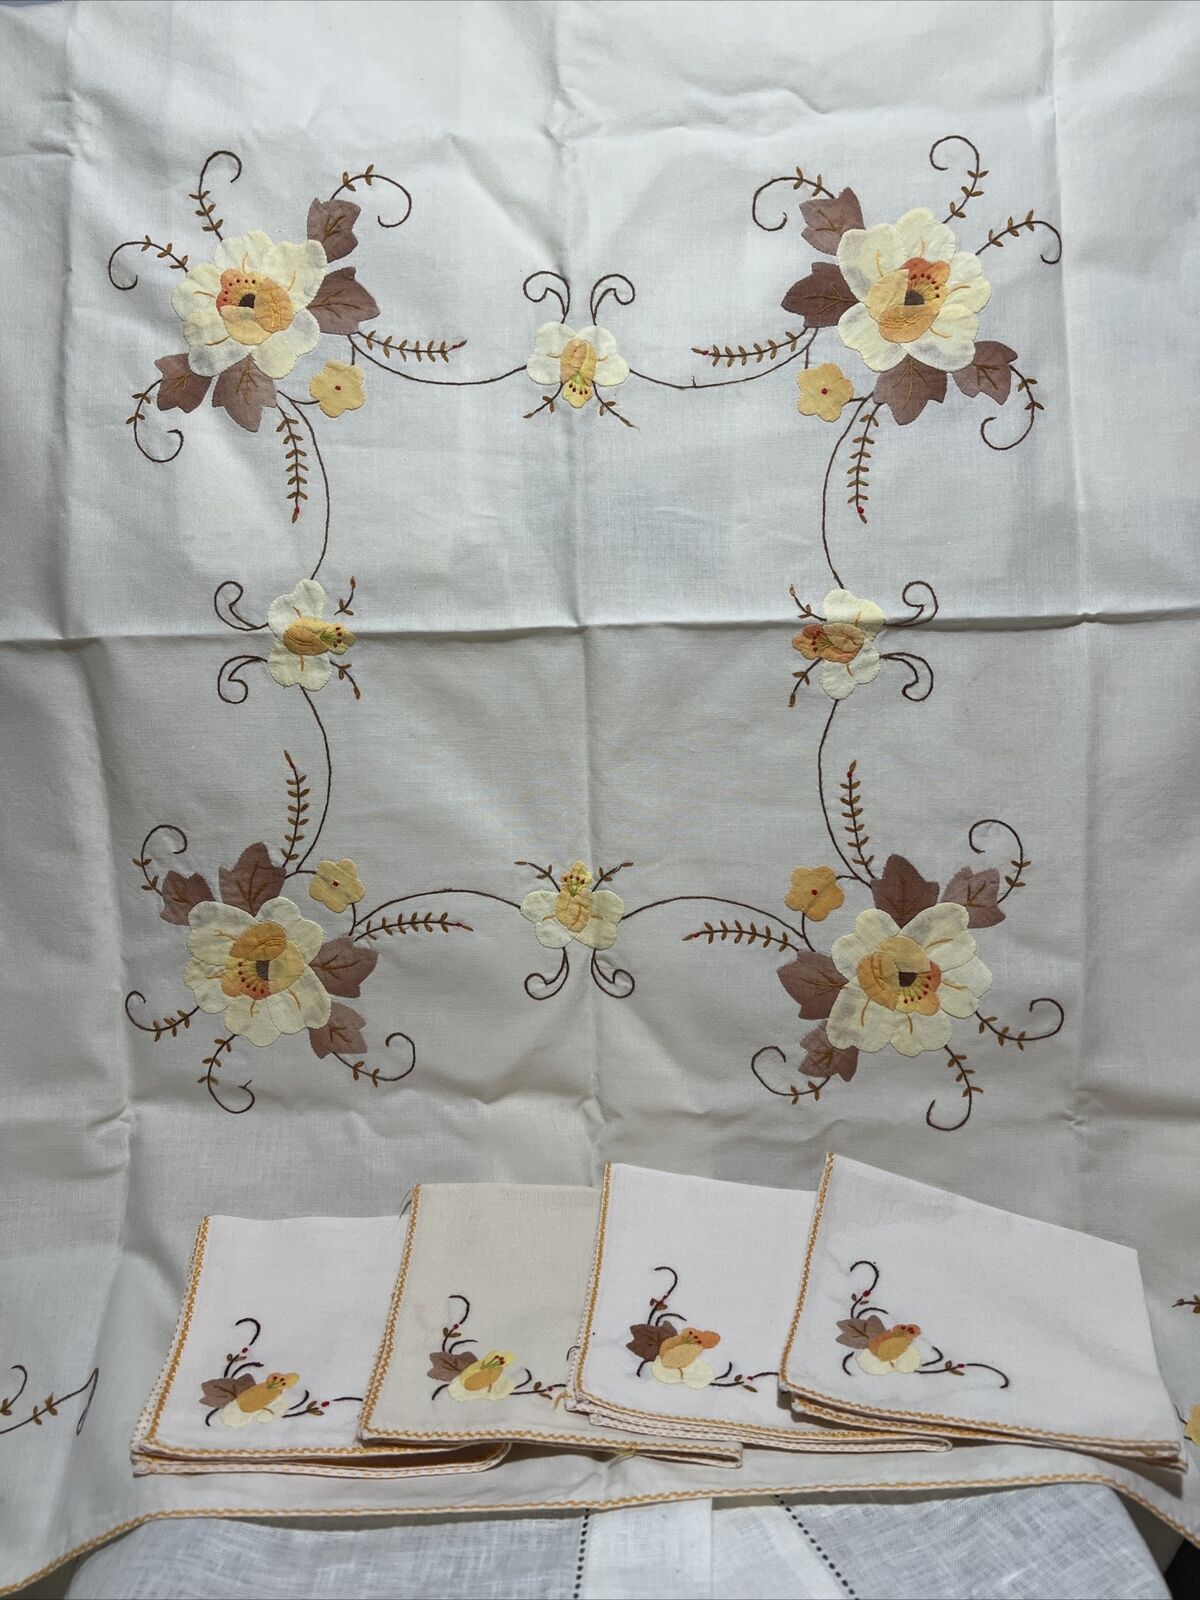 Vintage Hand Embroidered Tablecloth Cotton Flowers Applique Work With 4 Napkins